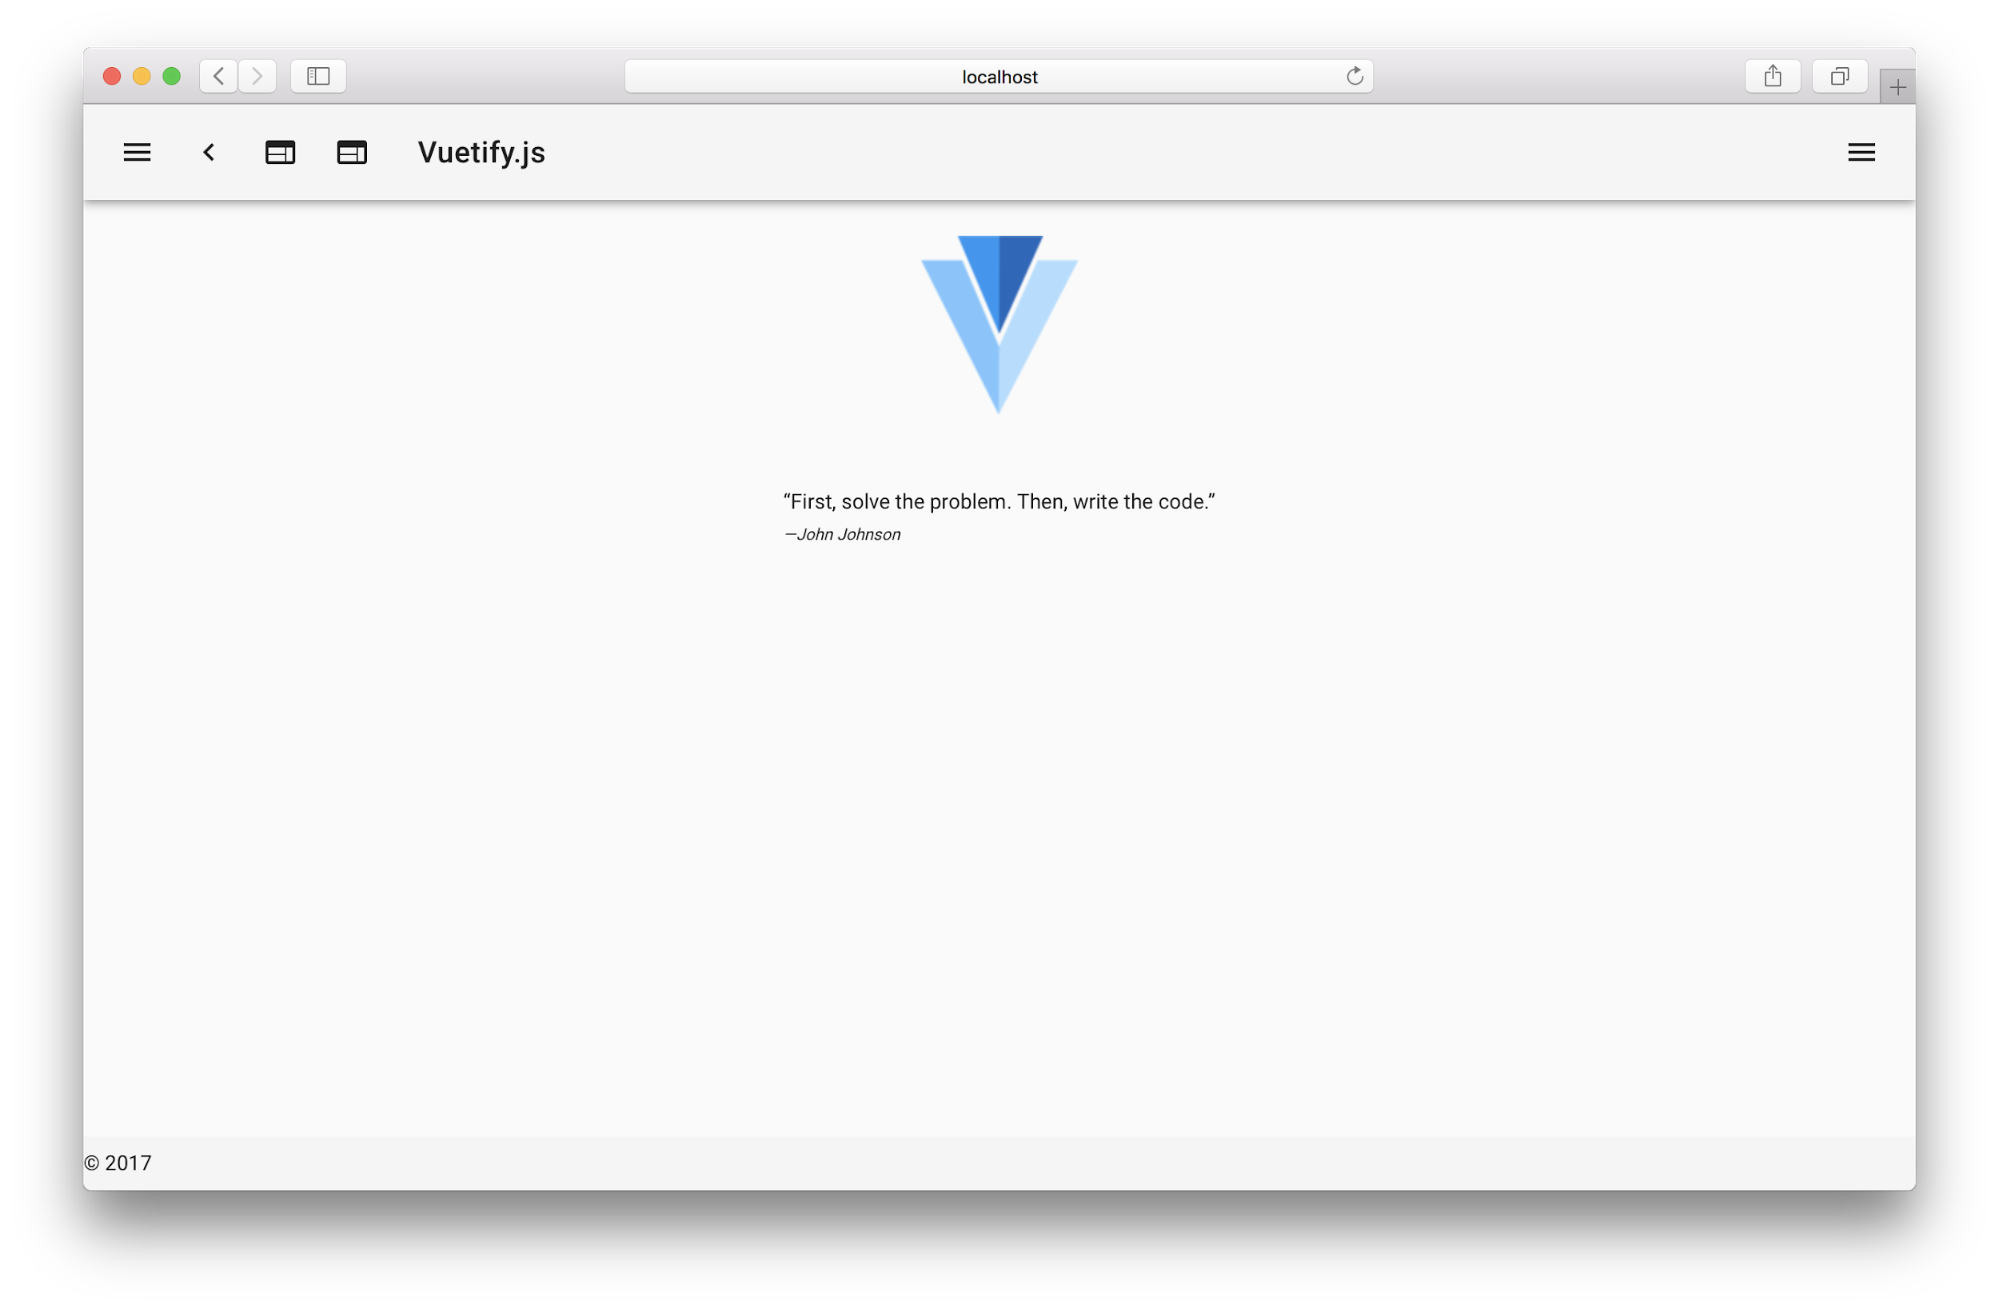 Vuetify page